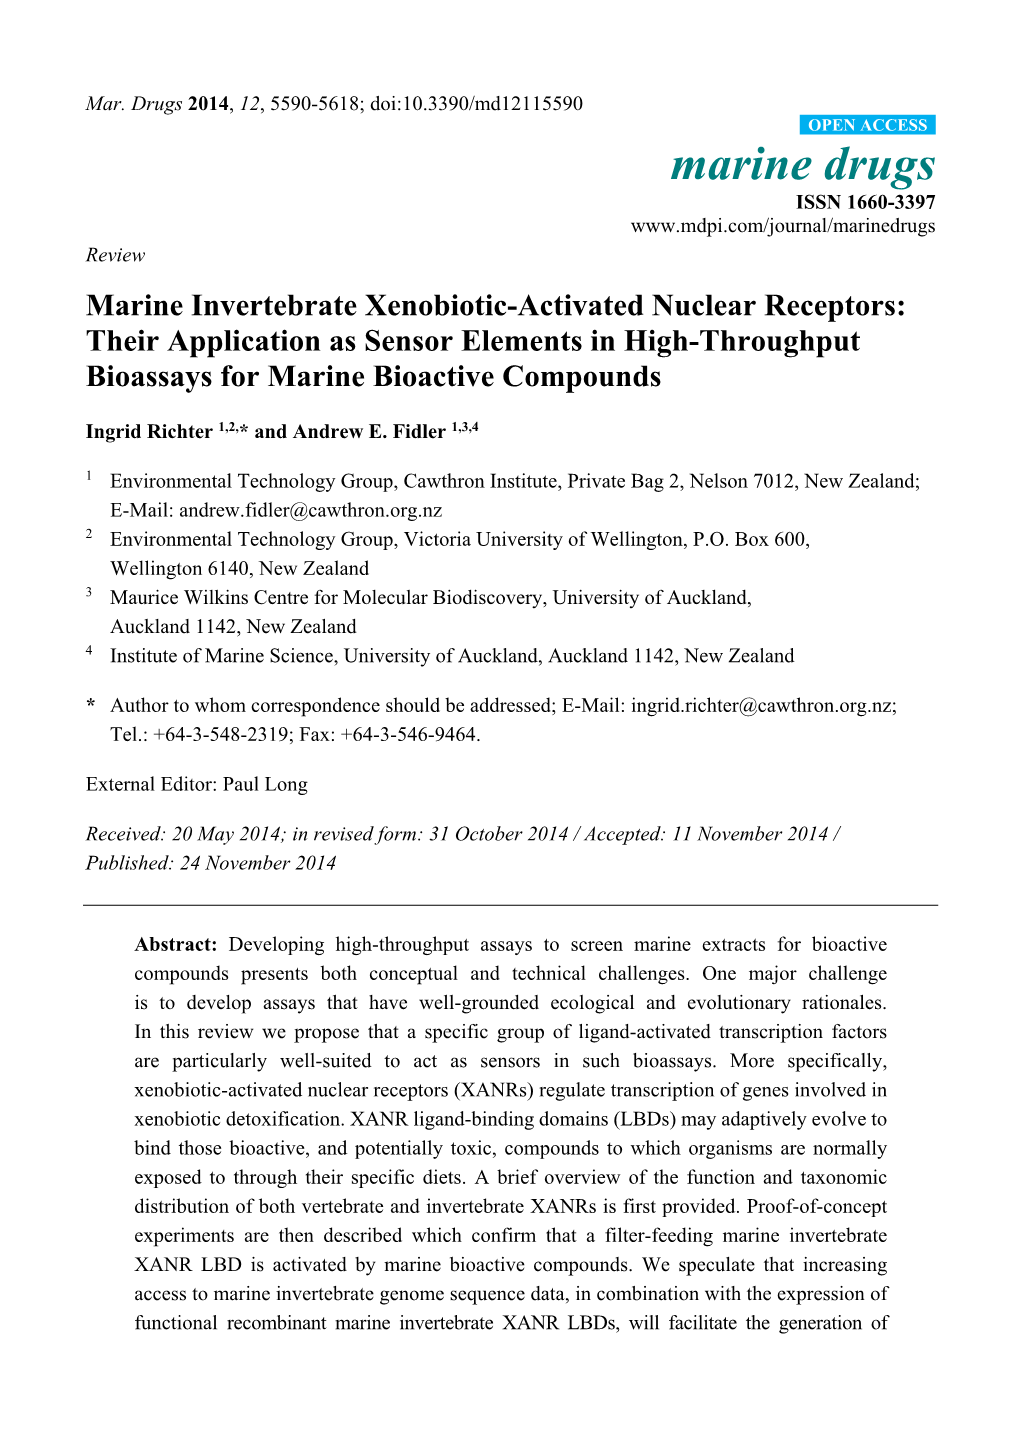 Marine Invertebrate Xenobiotic-Activated Nuclear Receptors: Their Application As Sensor Elements in High-Throughput Bioassays for Marine Bioactive Compounds